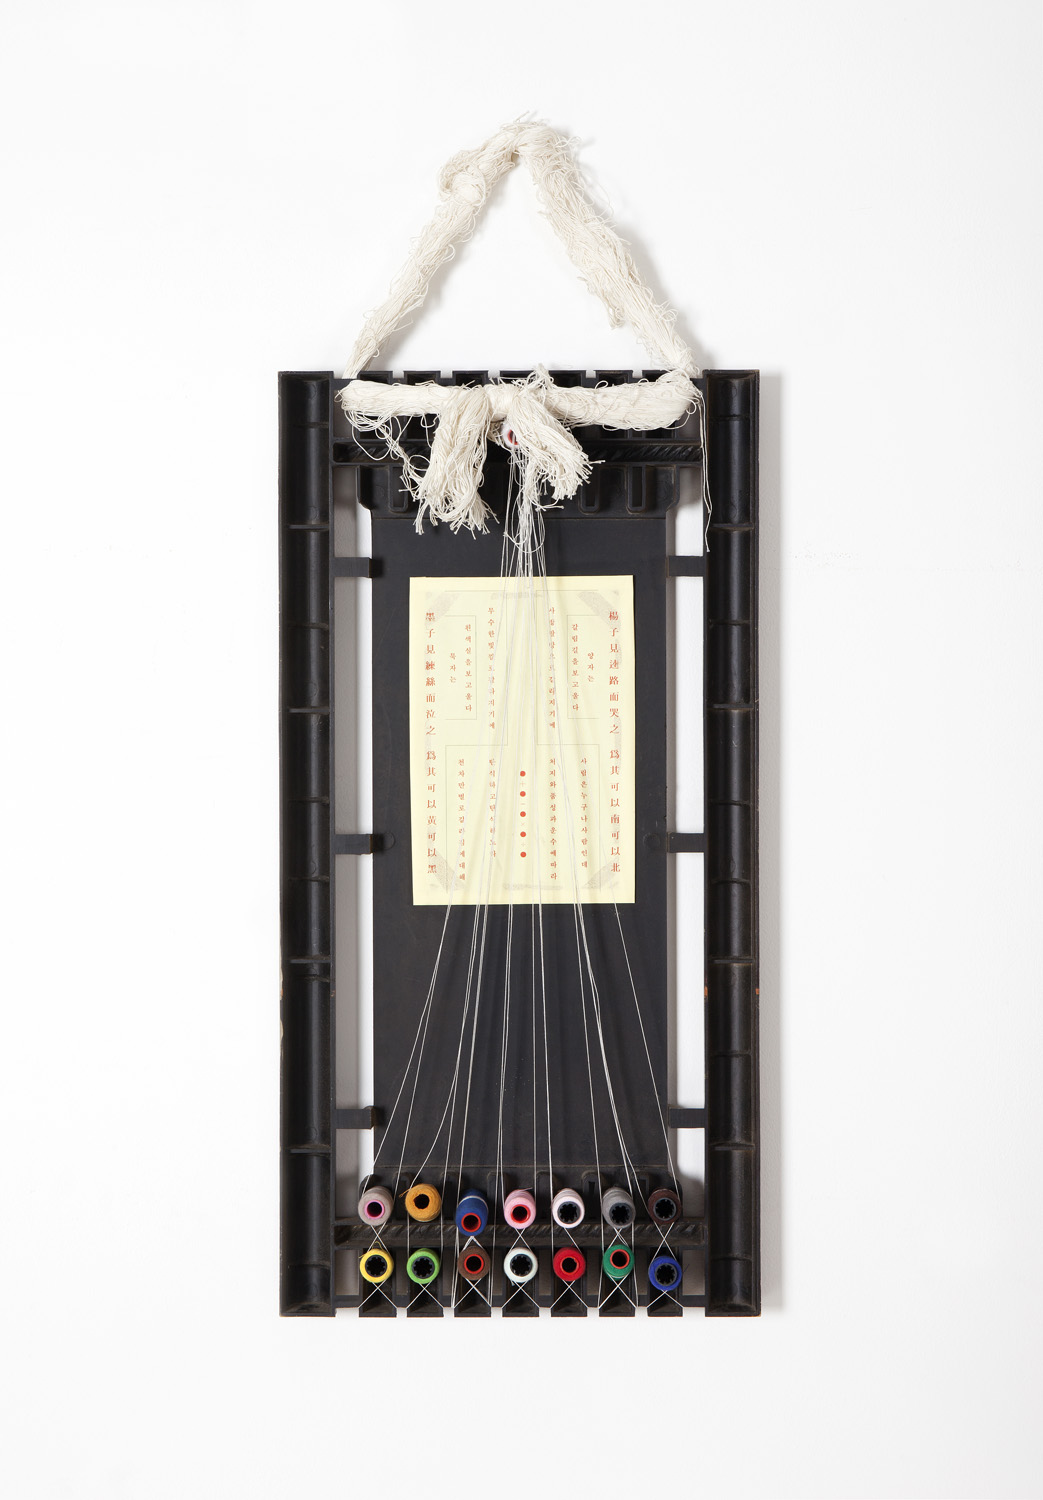 Crying After Seeing the White Threads, 2000, Dyed thread, white thread, print, panel, 84.5x39.5cm